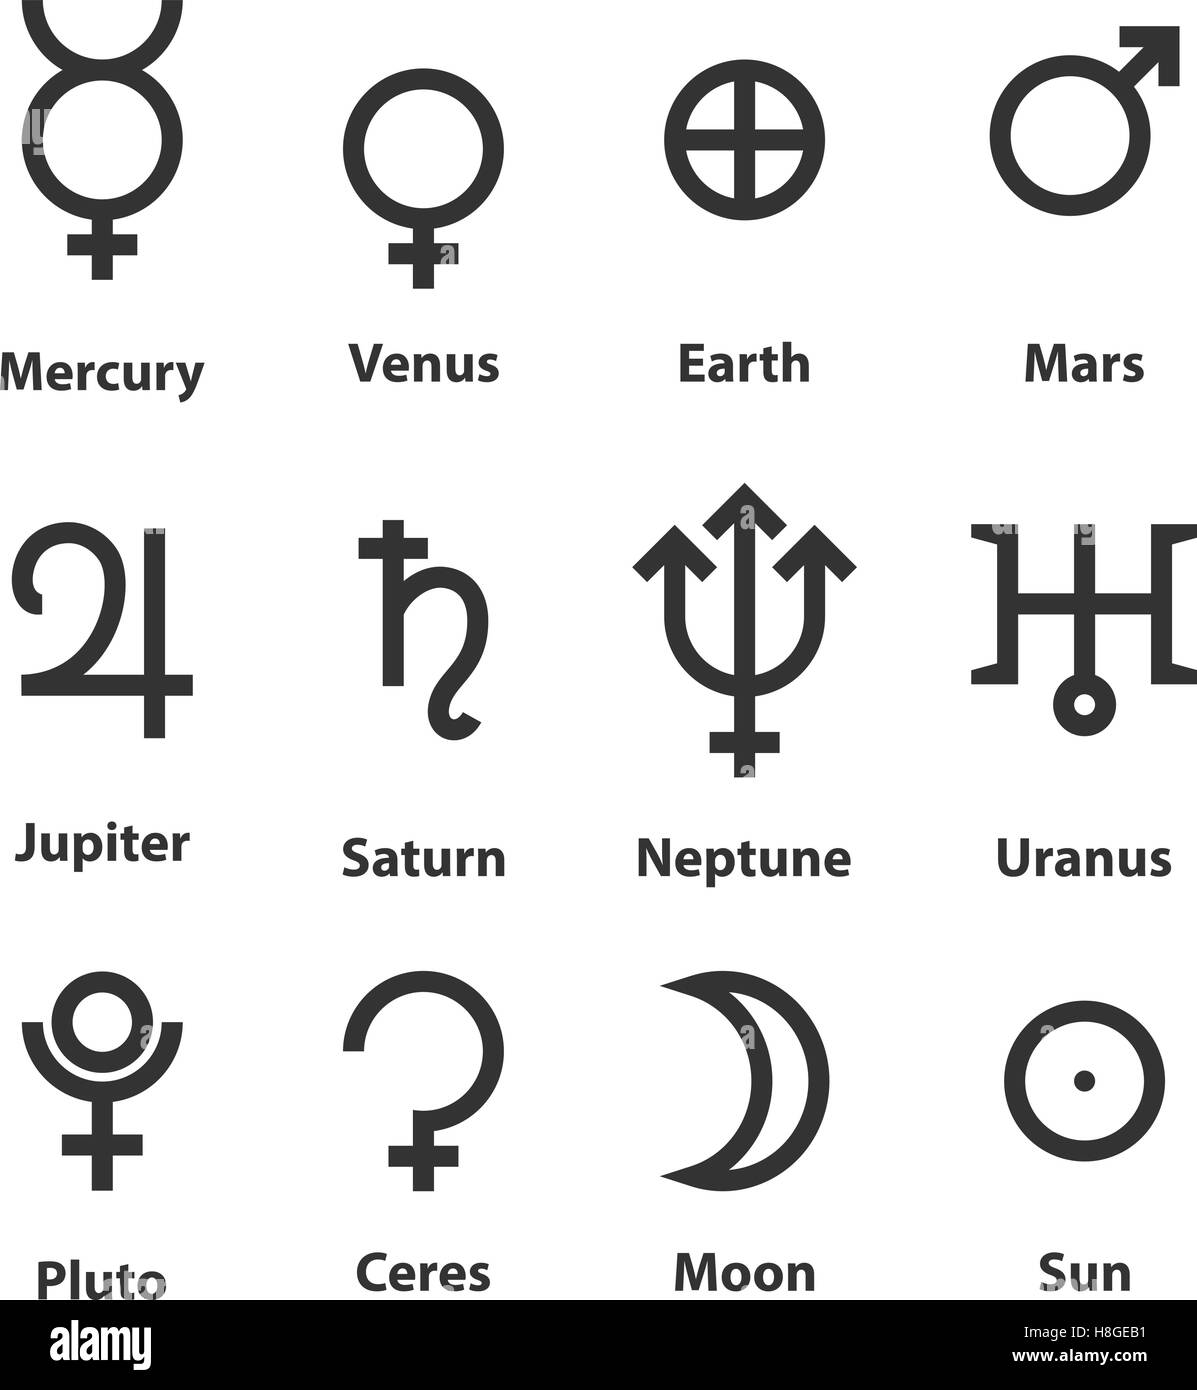 Zodiac and astrology symbols of the planets. Vector illustration Stock Vector